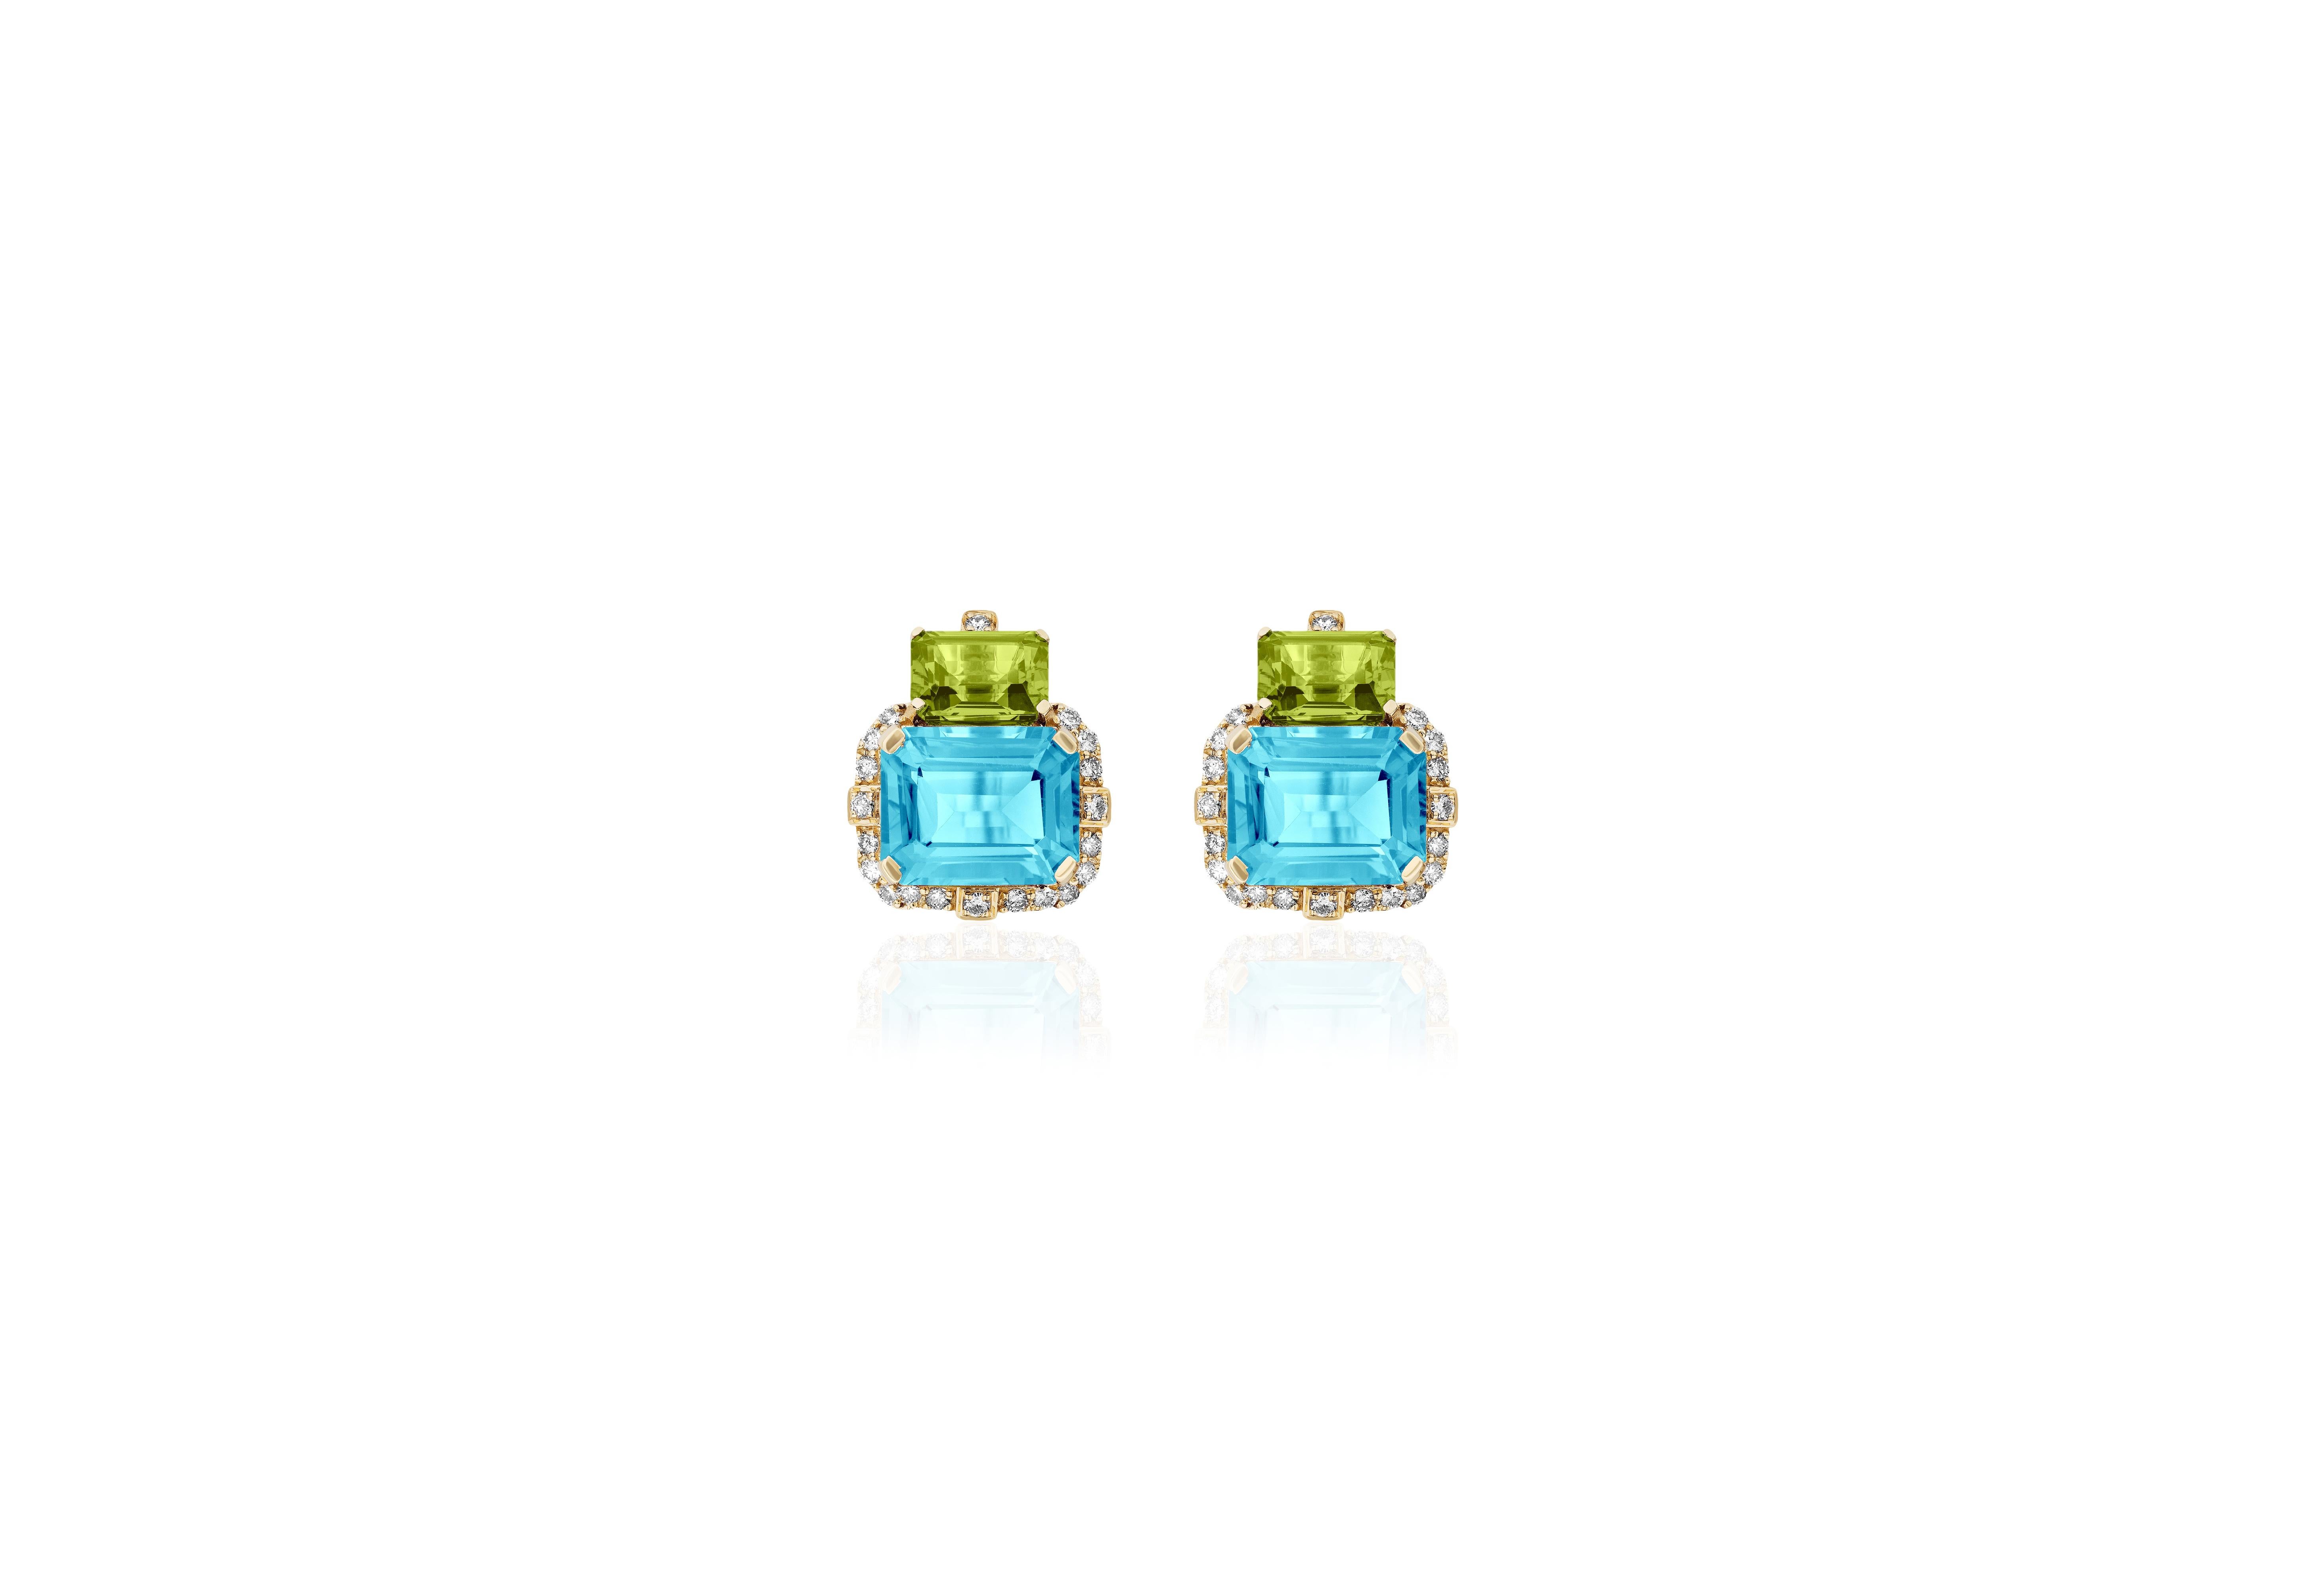 Introducing the captivating 2 Stone Peridot and Blue Topaz Emerald Cut Earrings with Diamonds in 18K Yellow Gold, a remarkable creation from the exquisite 'Gossip' Collection. Crafted with meticulous attention to detail, these earrings embody